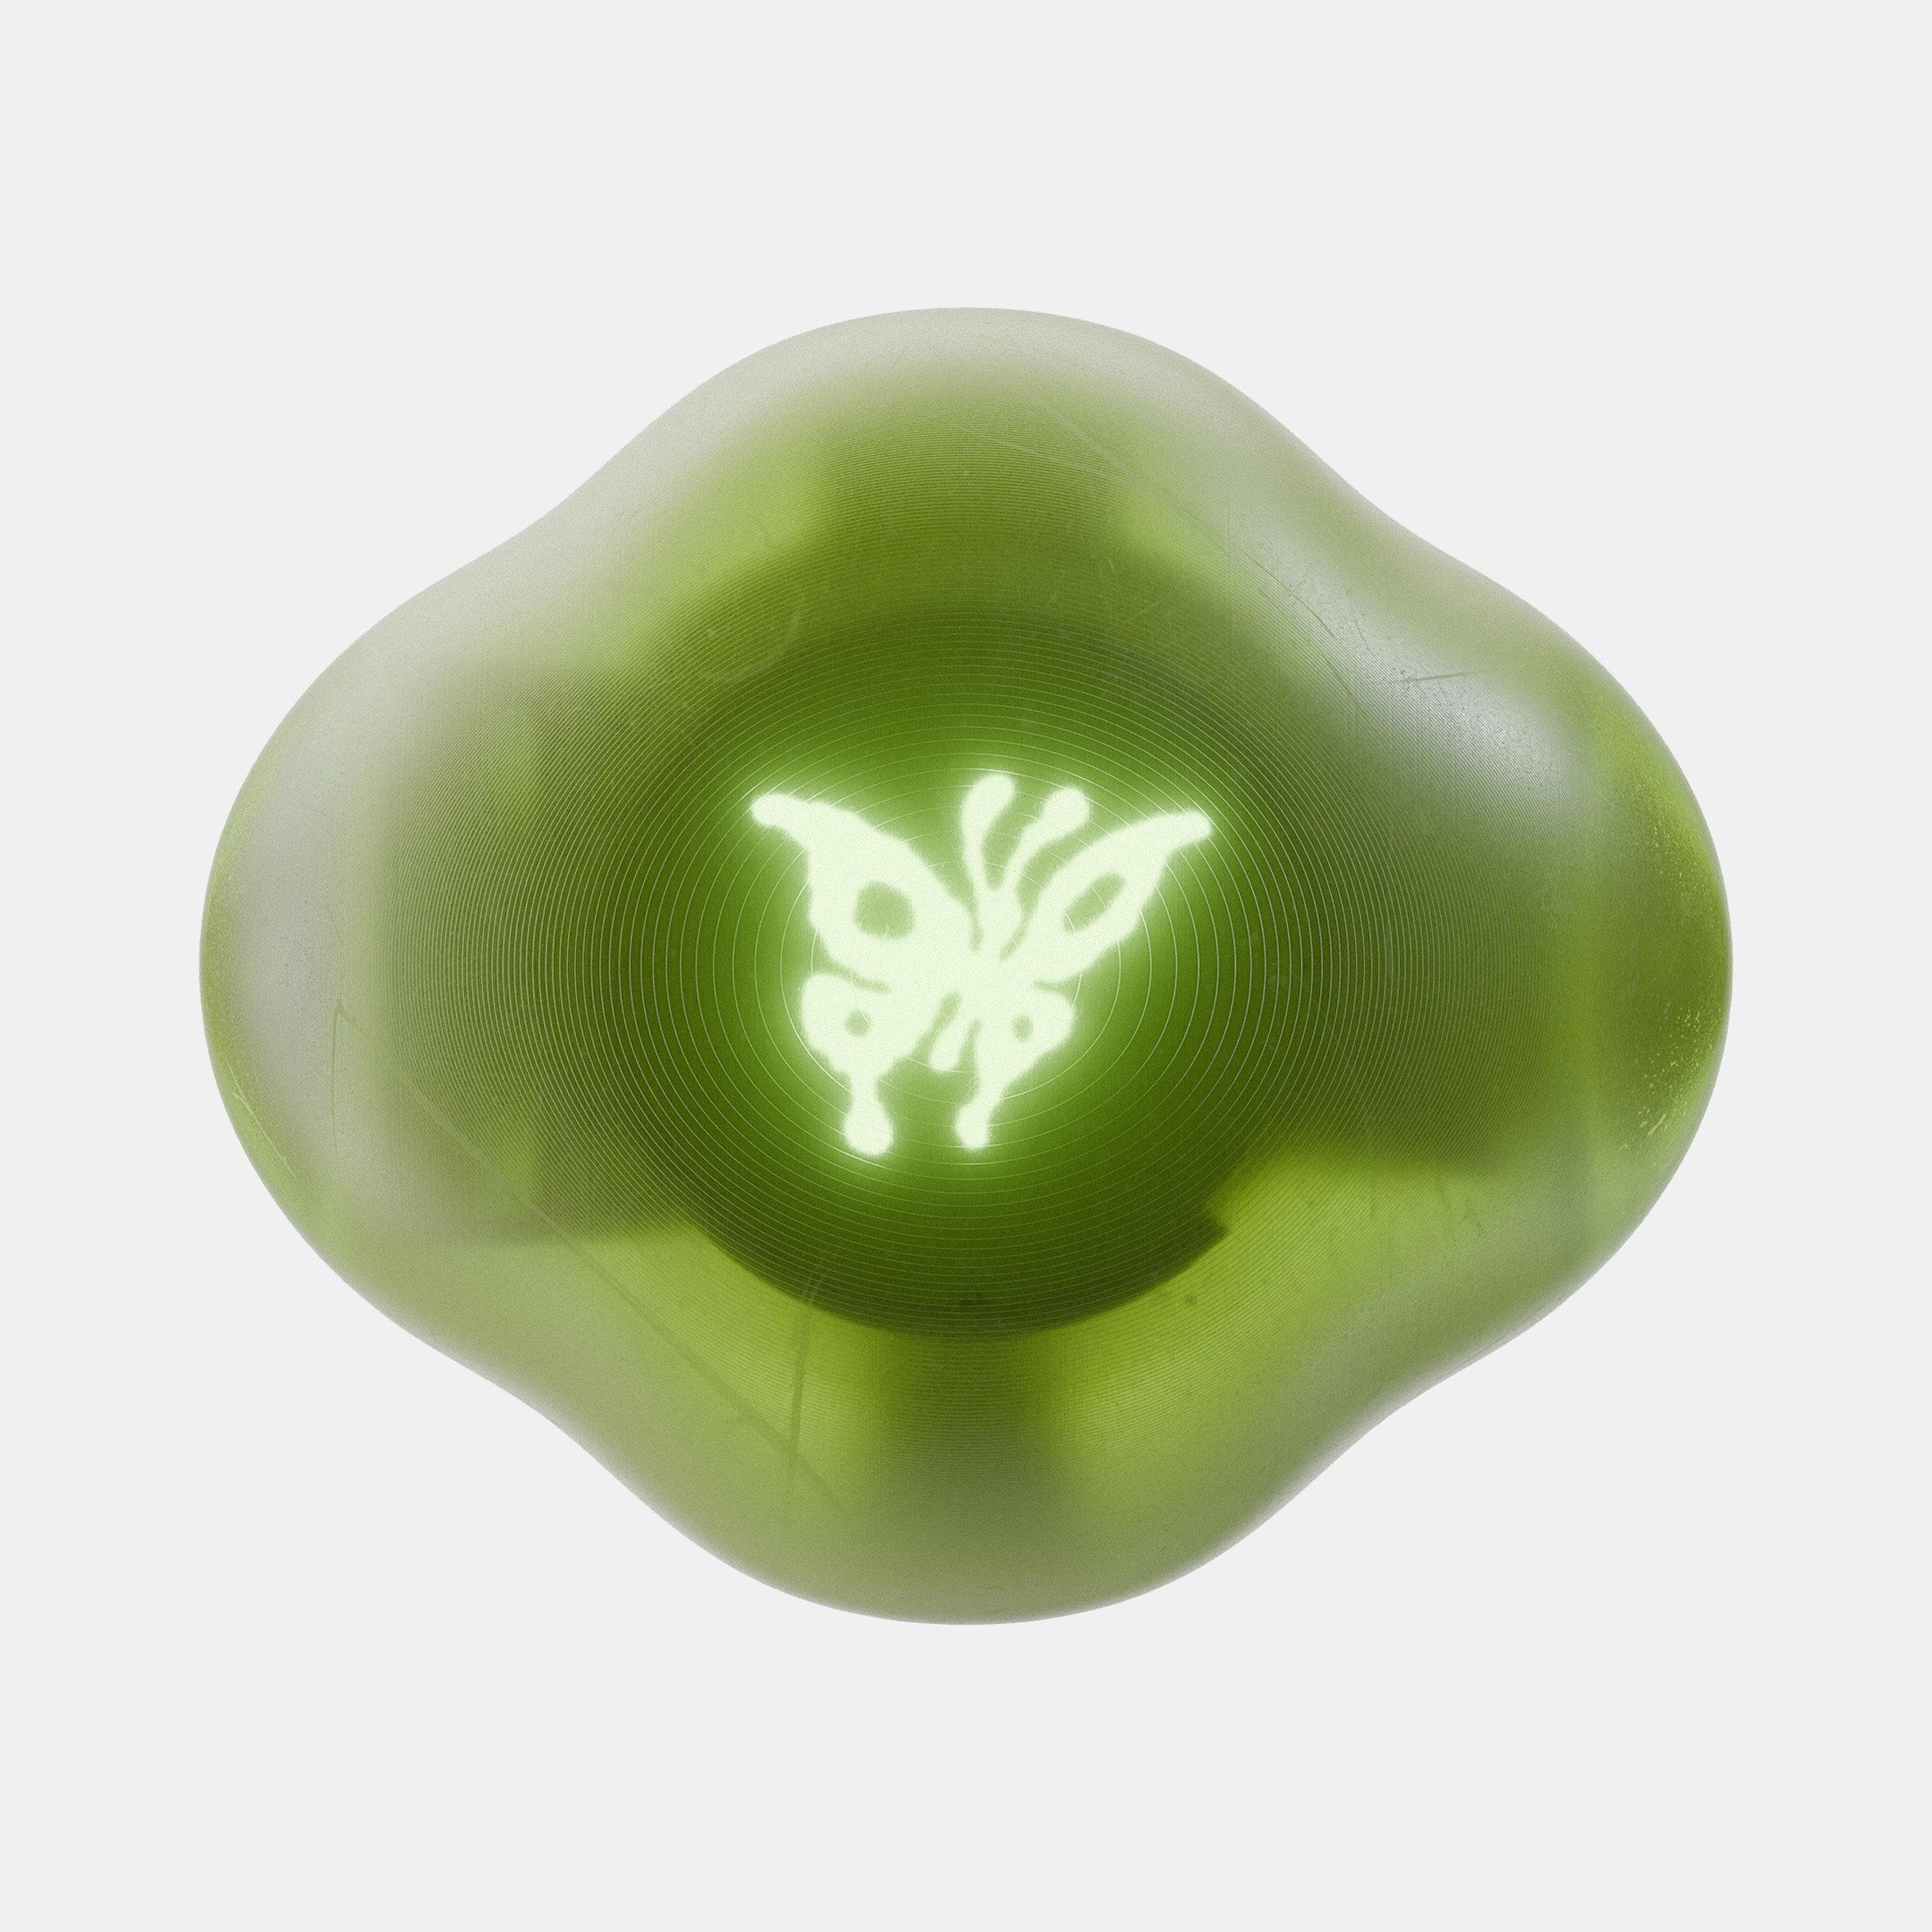 Product photo of a green Terra device displaying a lit-up butterfly symbol